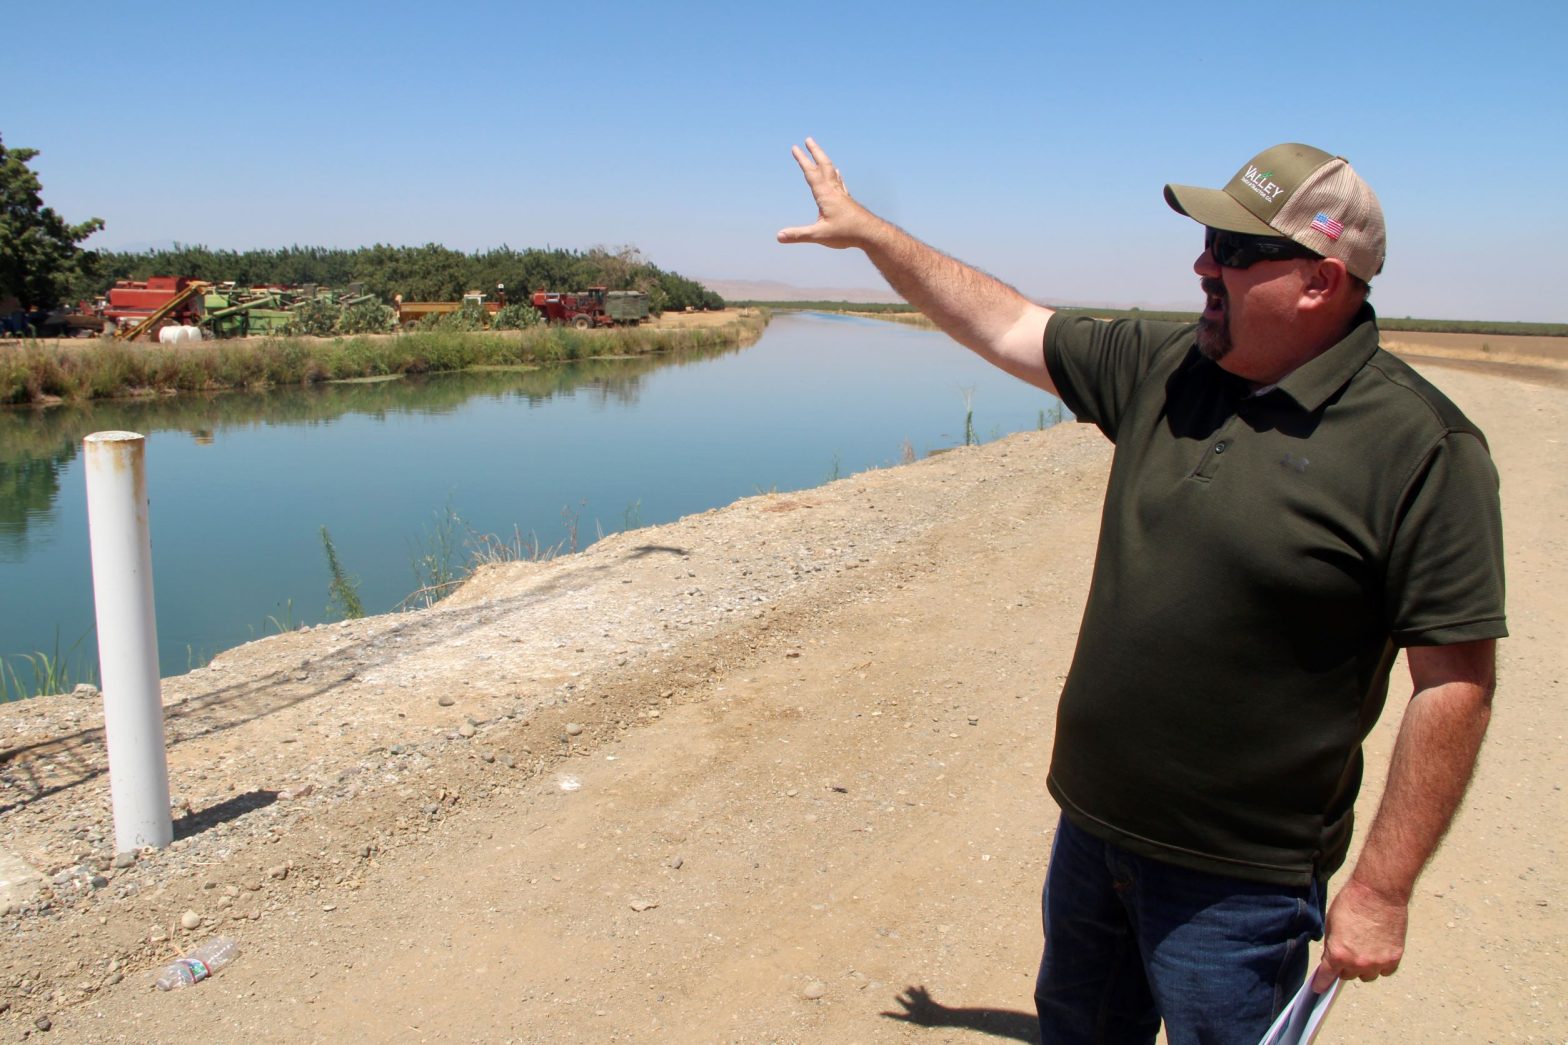 California Moves Slowly on Water Projects Amid Drought